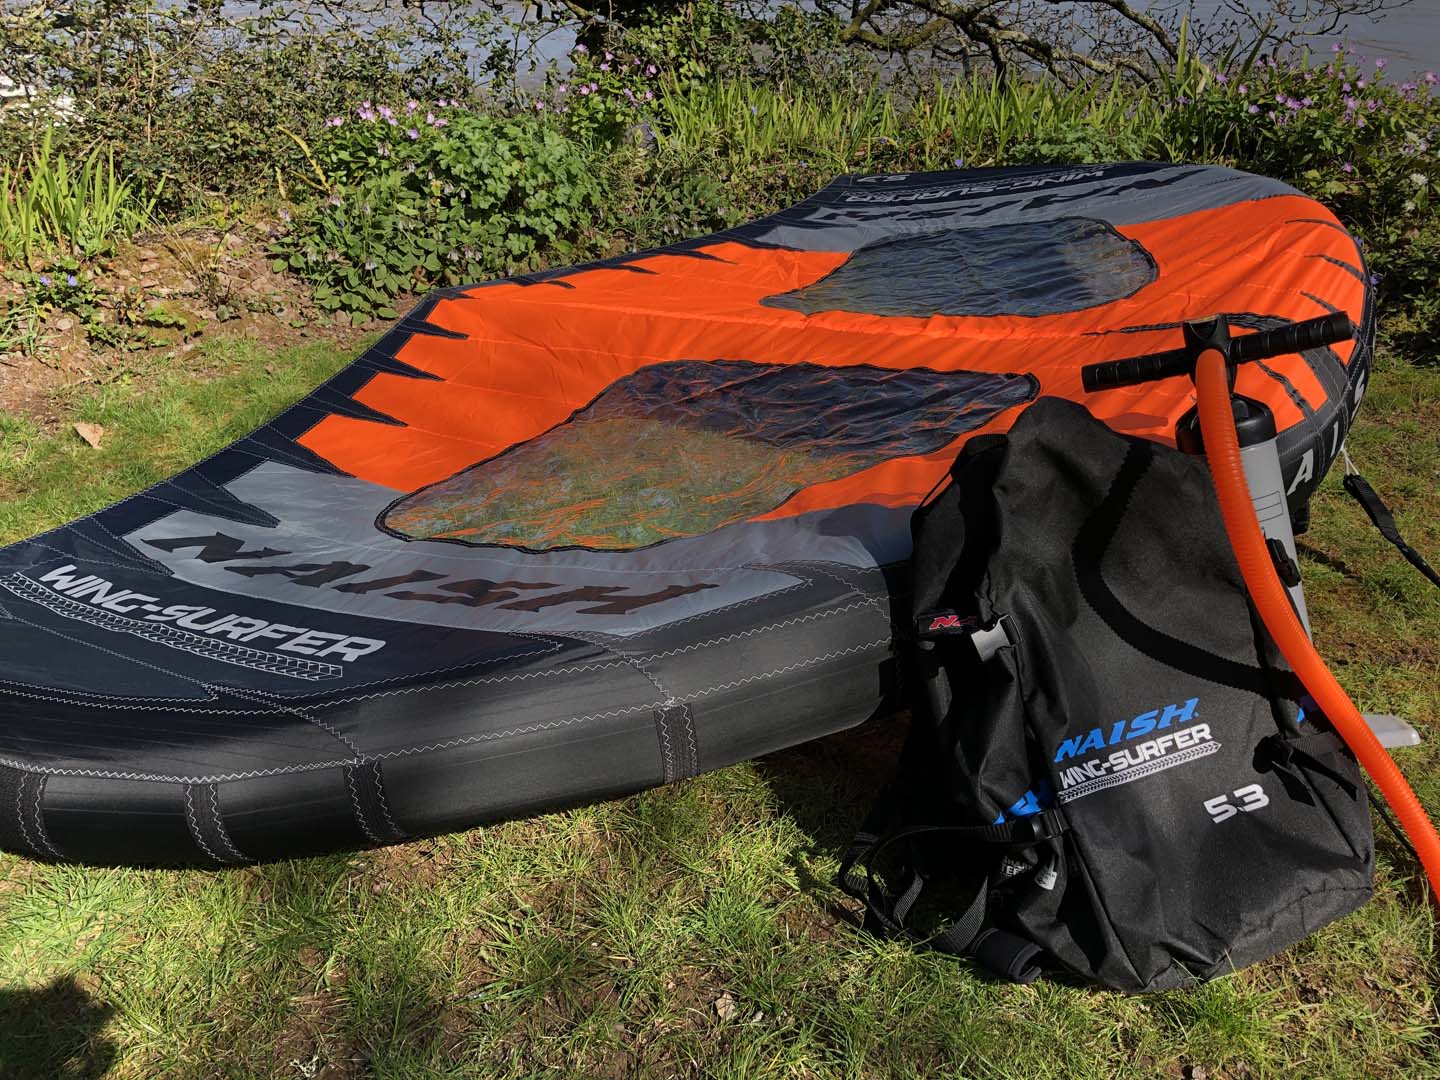 2021 Naish S25 Wing-Surfer reviewed and compared to the 2020 Wing